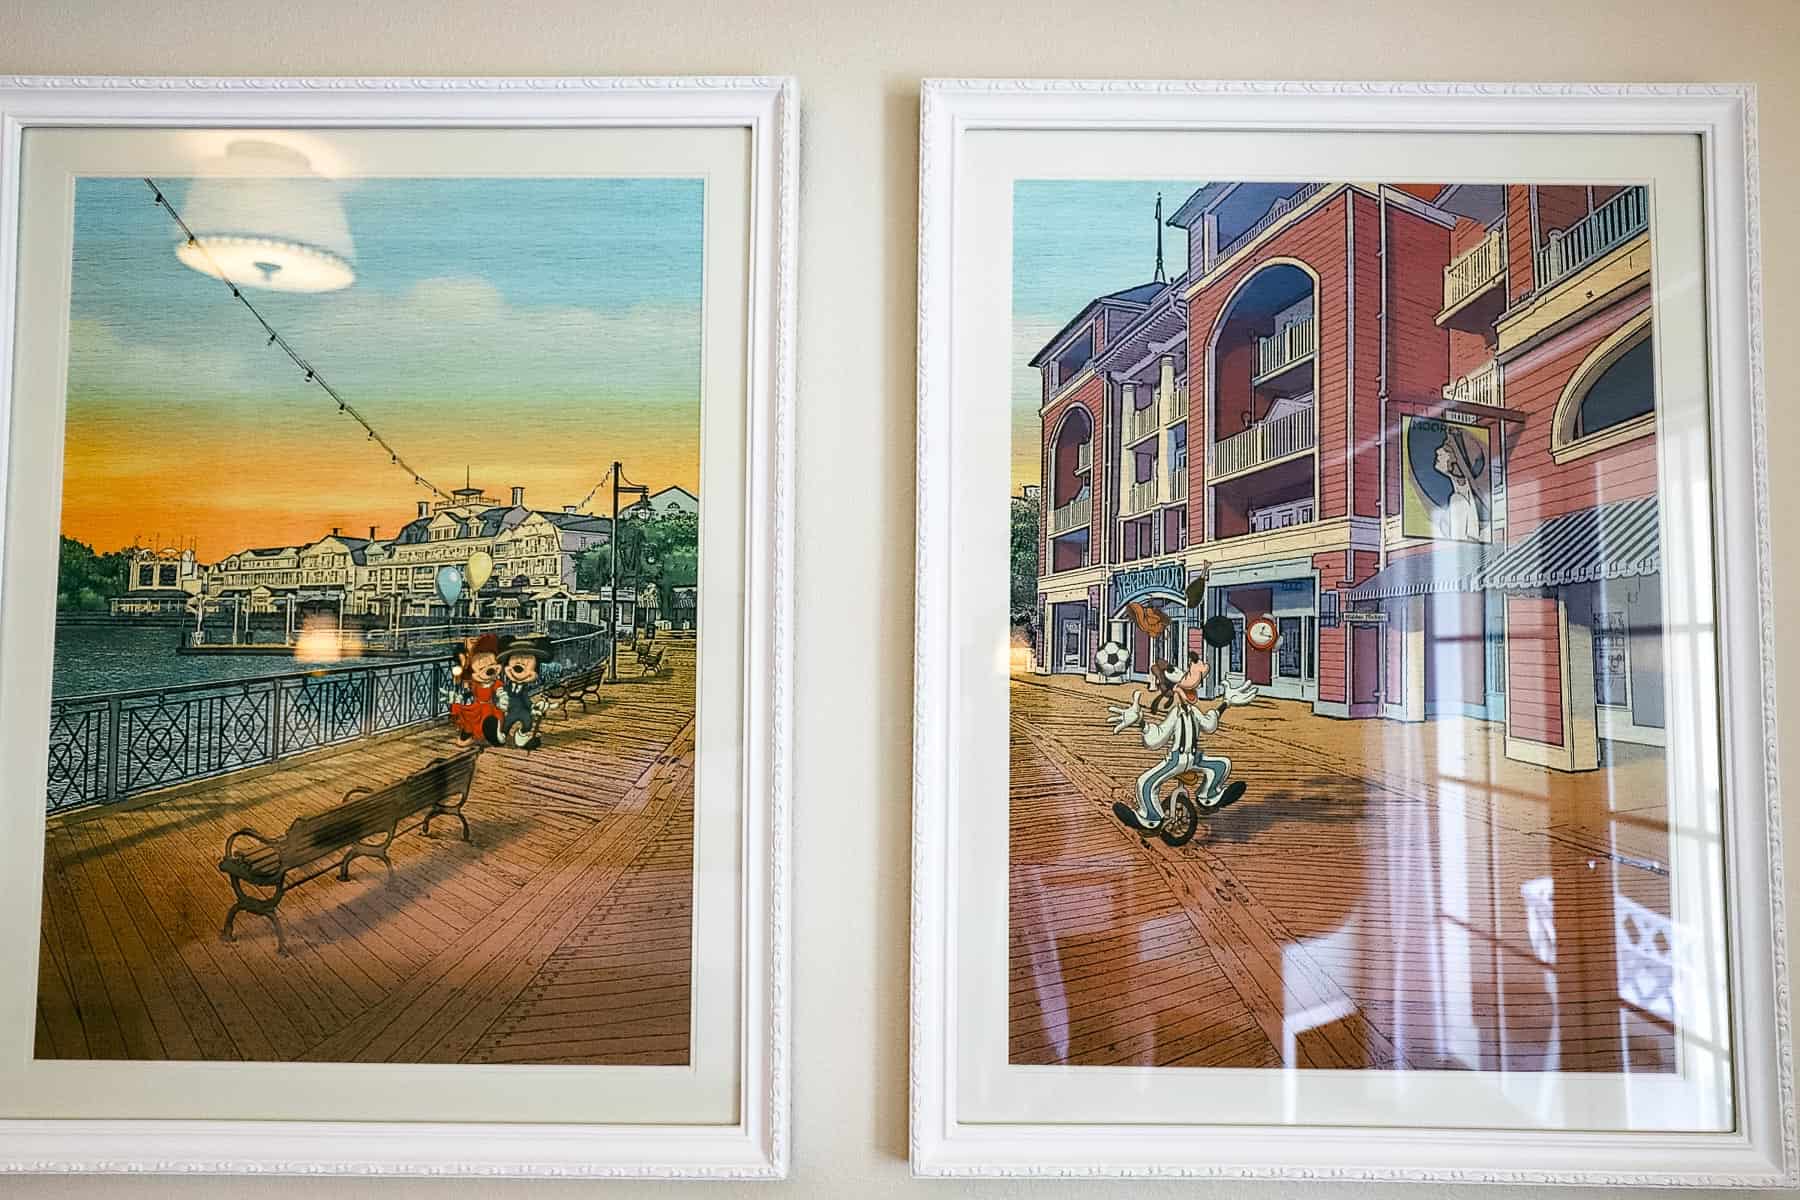 New artwork featuring characters on Disney's Boardwalk